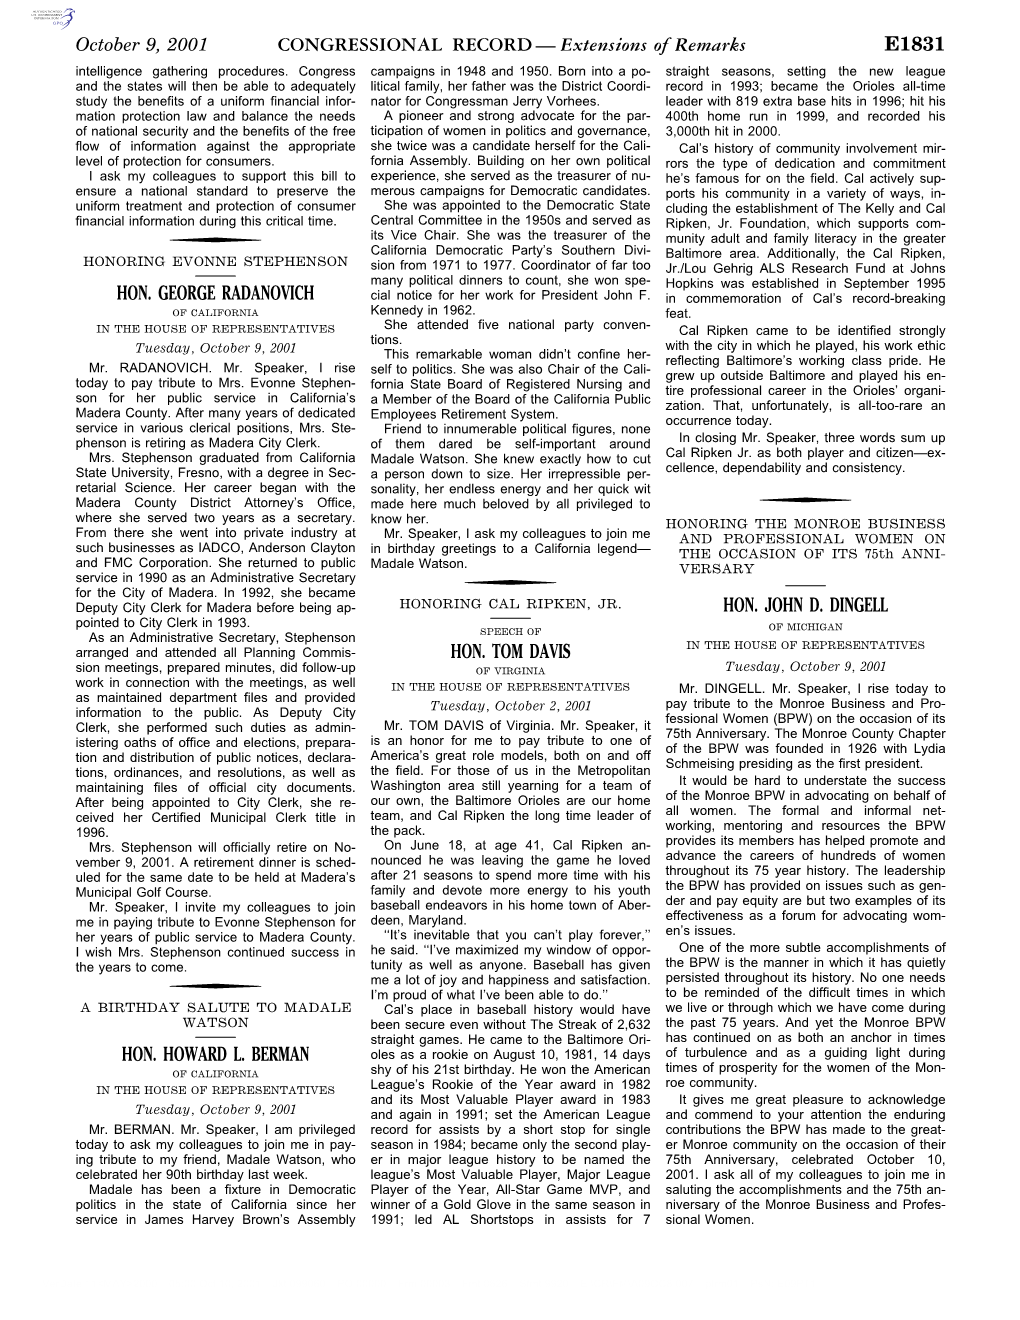 CONGRESSIONAL RECORD— Extensions of Remarks E1831 HON